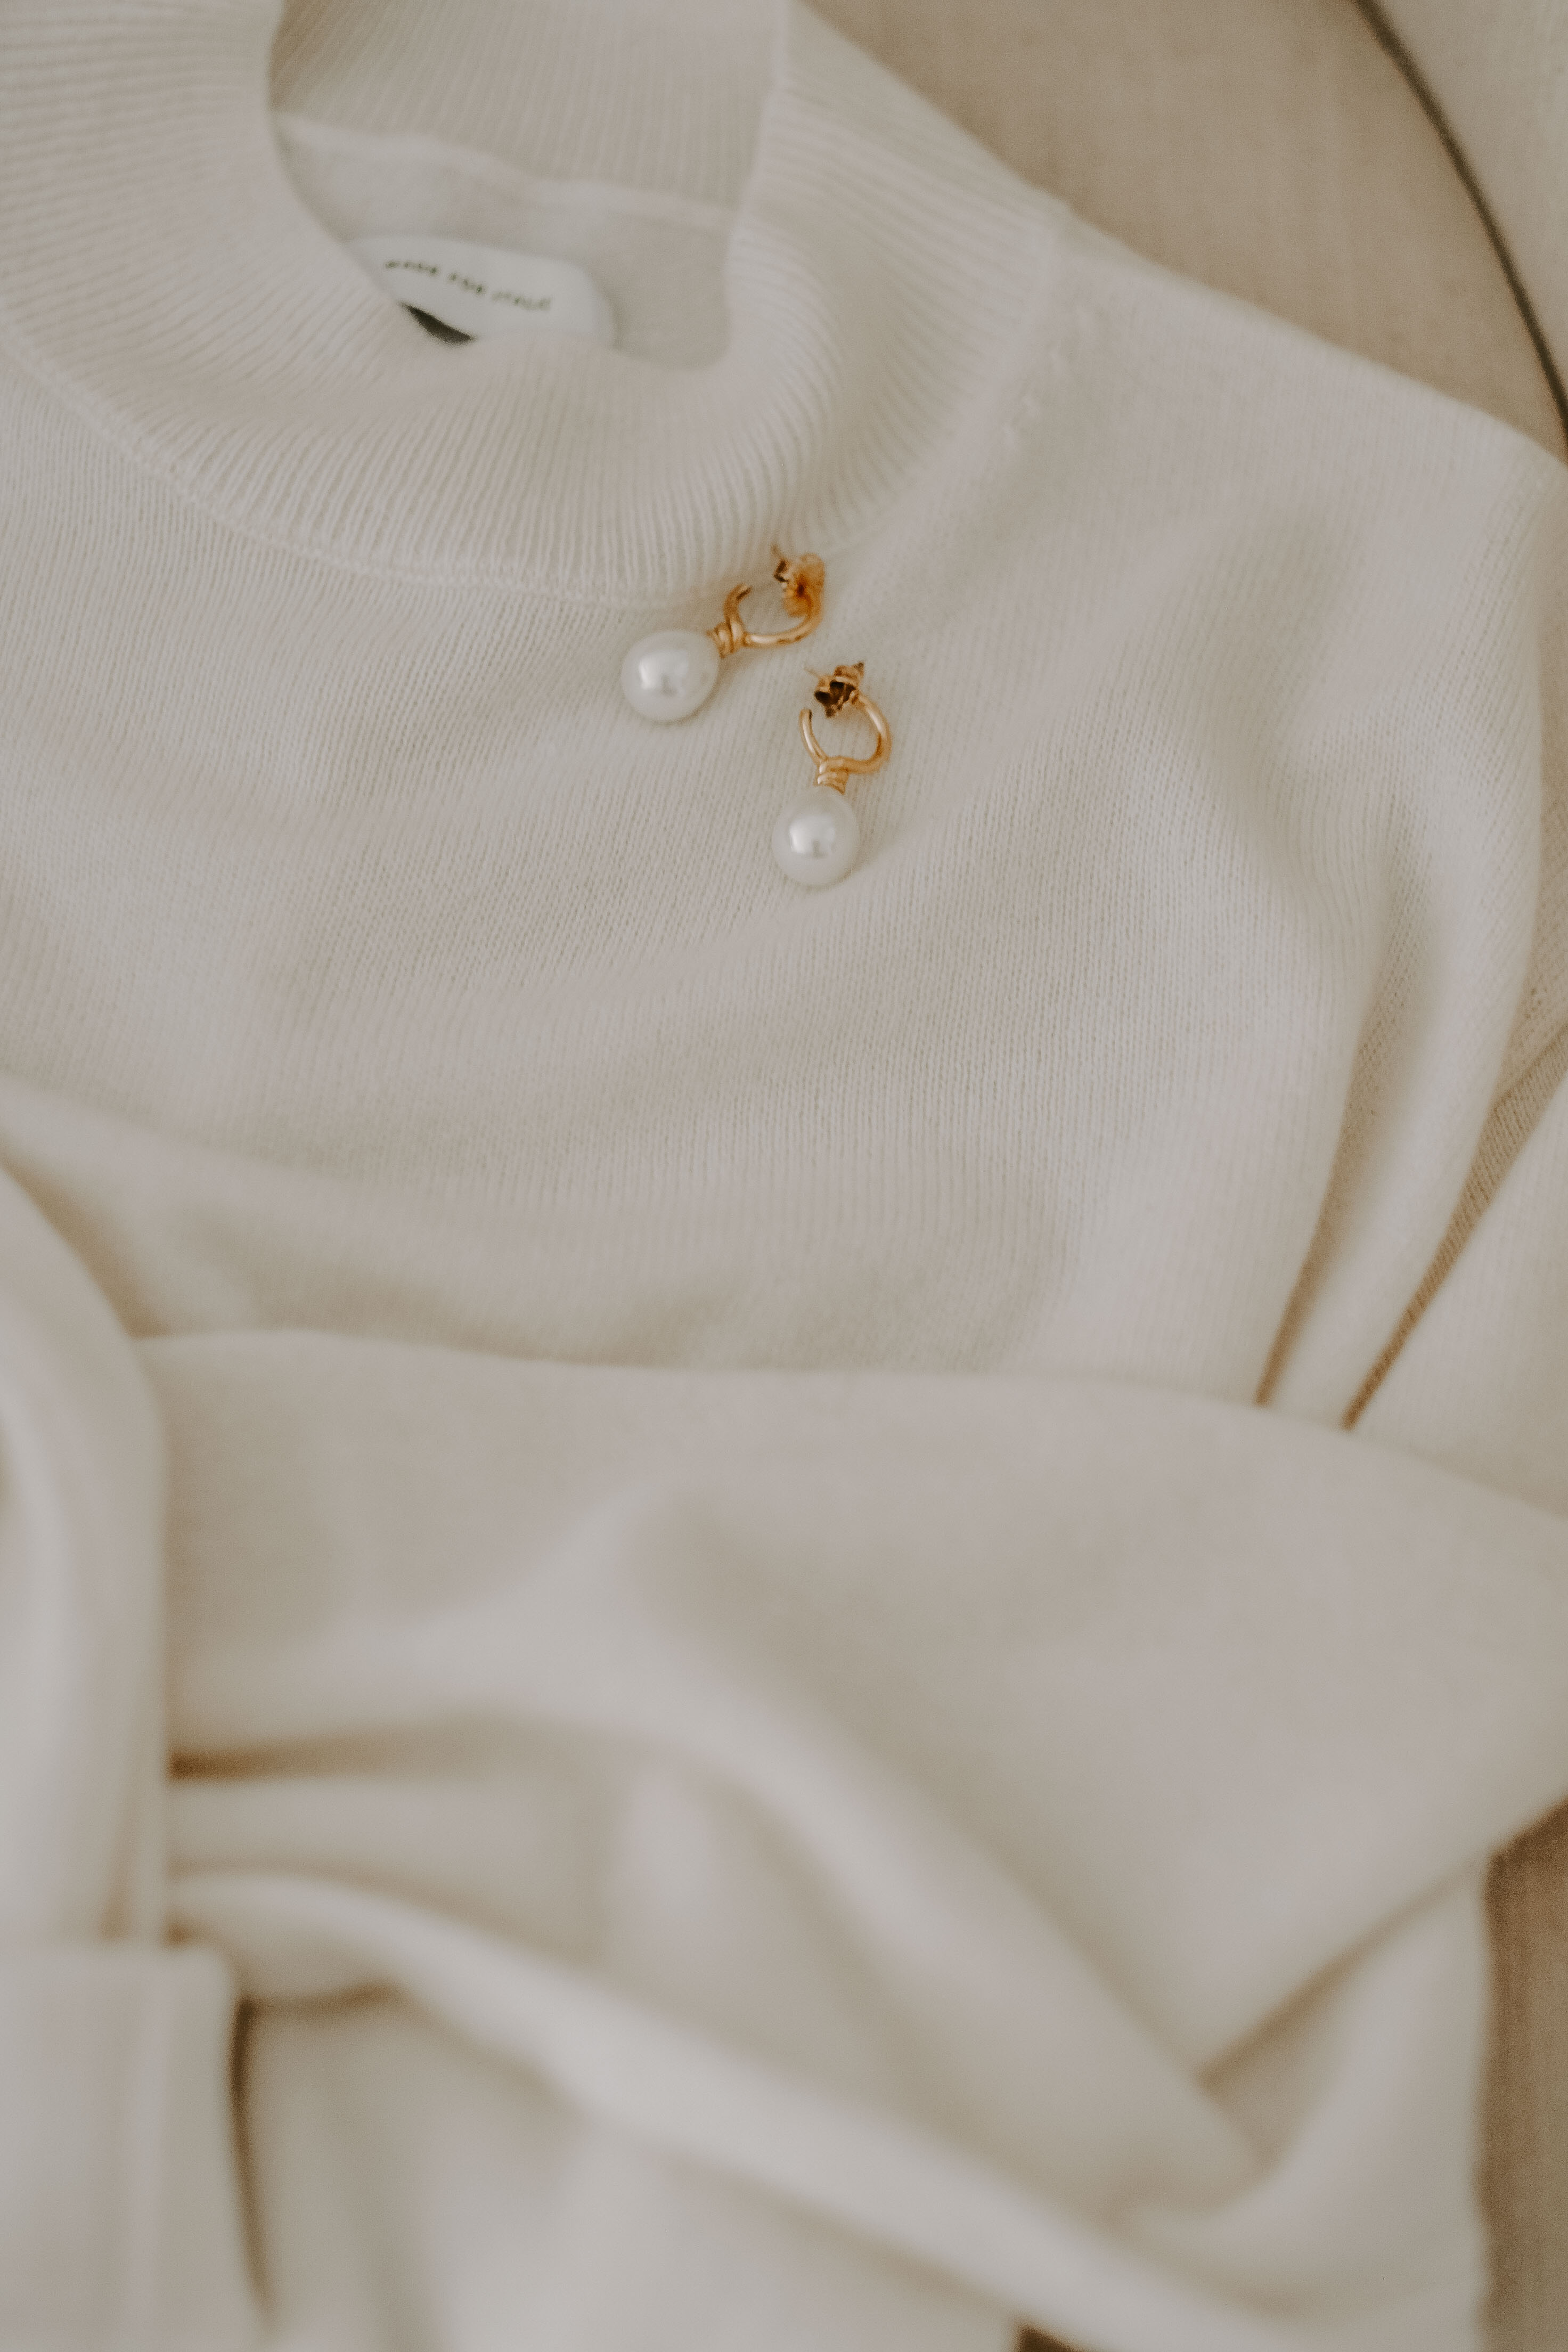 cashmere sweater and pearl earrings